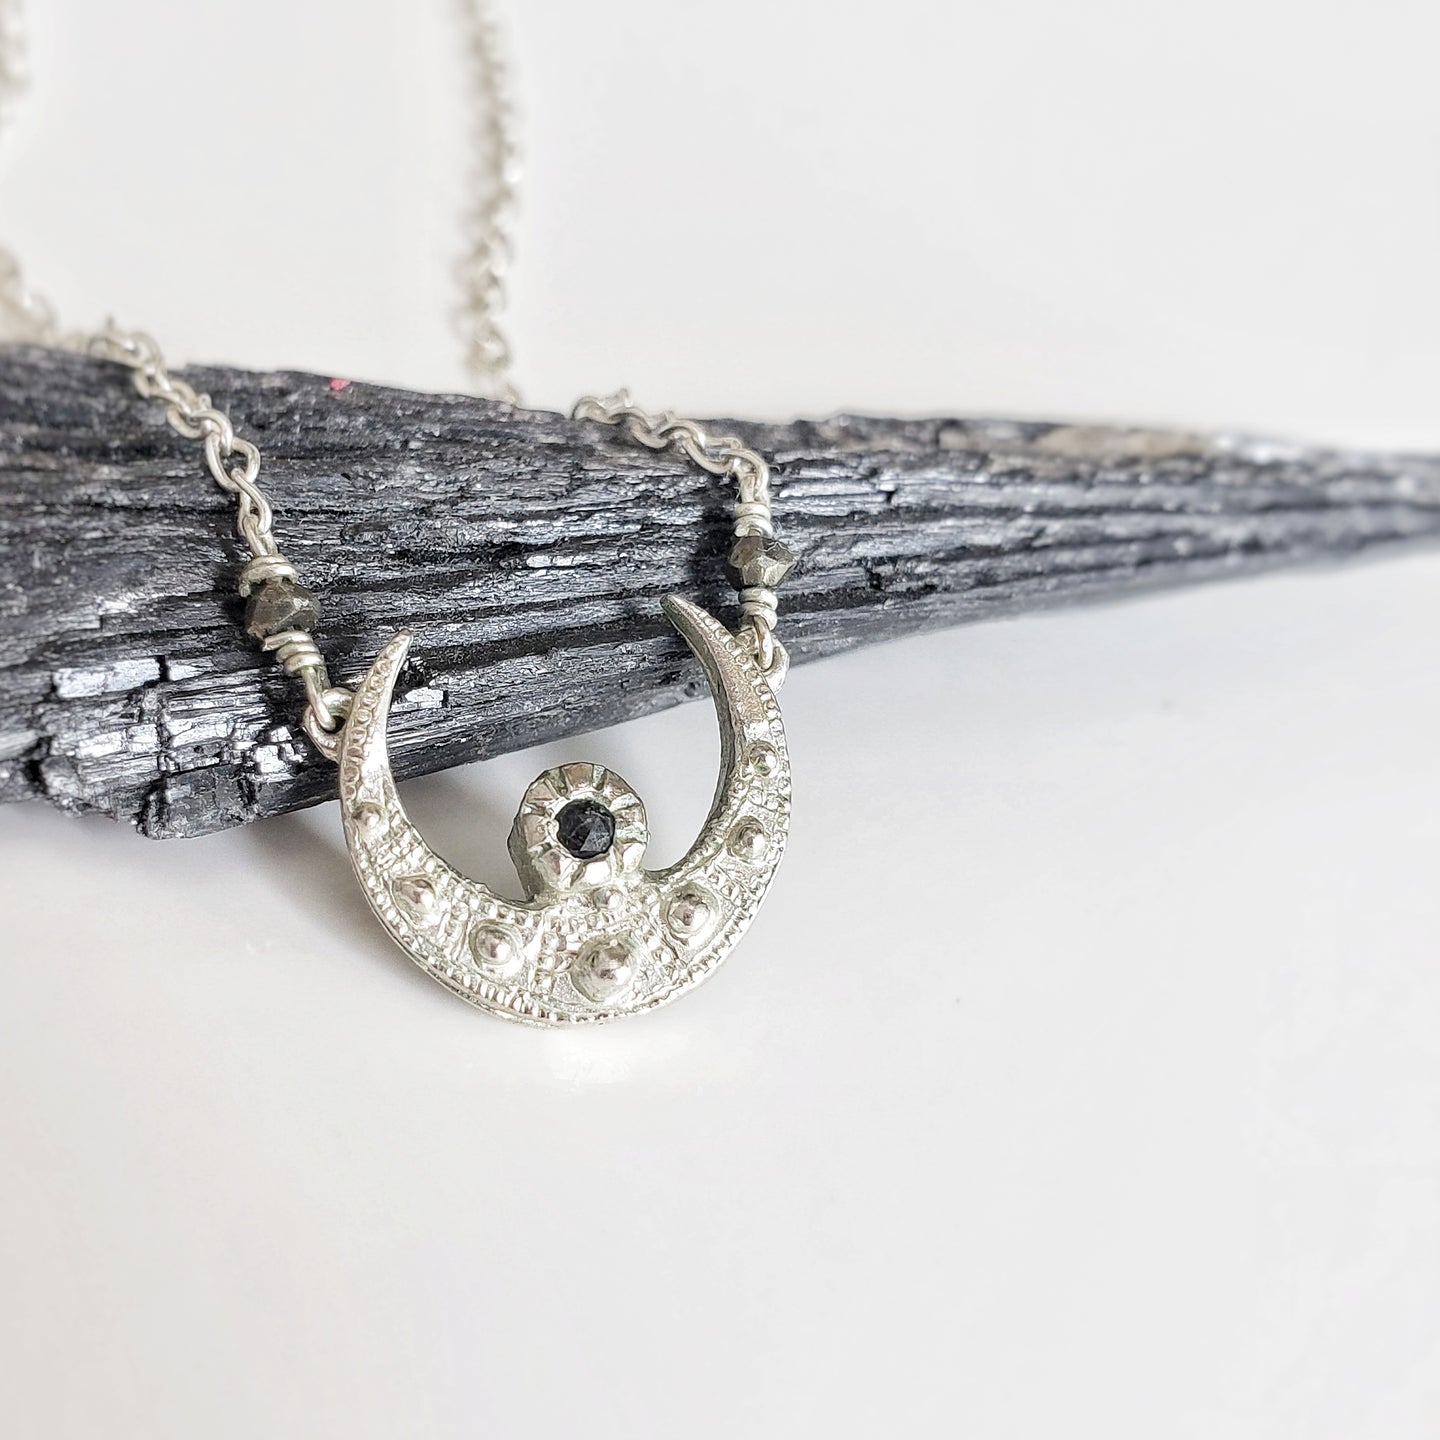 Up Turned Crescent Moon Necklace, Silver